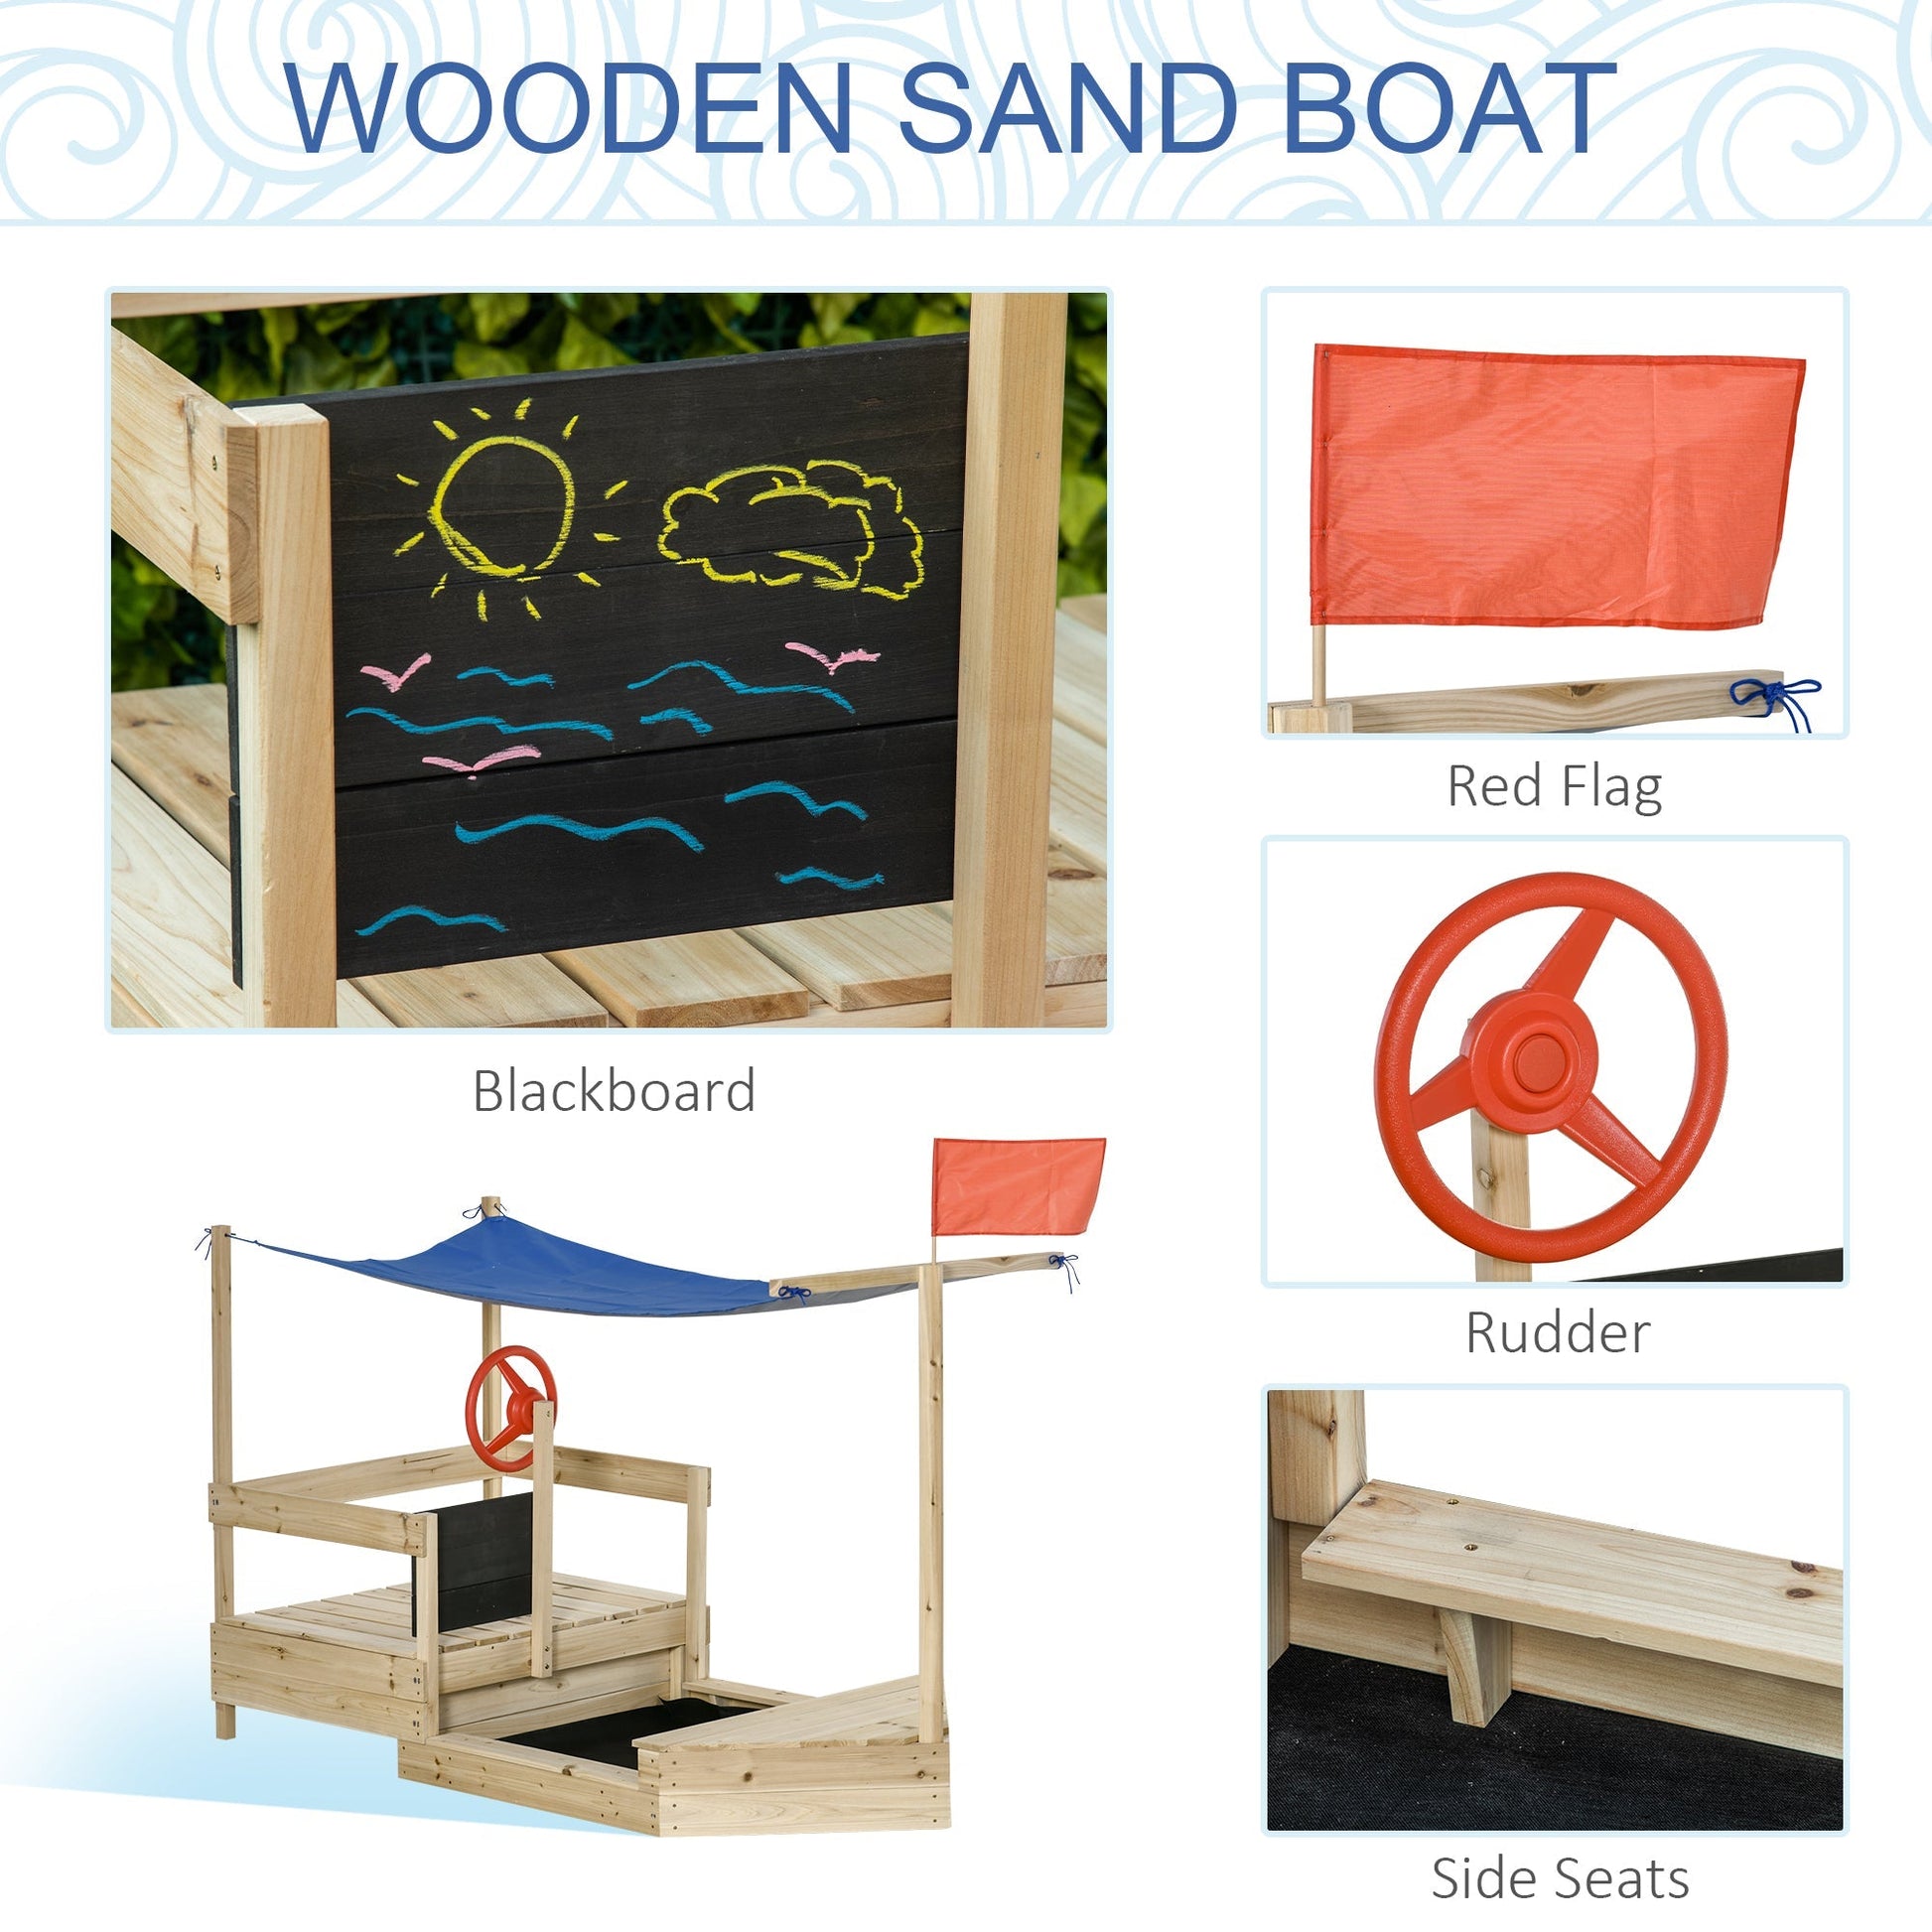 Kids Wooden Sandbox, Covered Children Sand boat Outdoor, Foldable Play Station, w/ Flag, Canopy Shade, Bottom Liner, Blackboard, for 3-8 Years Old, Natural Wood at Gallery Canada